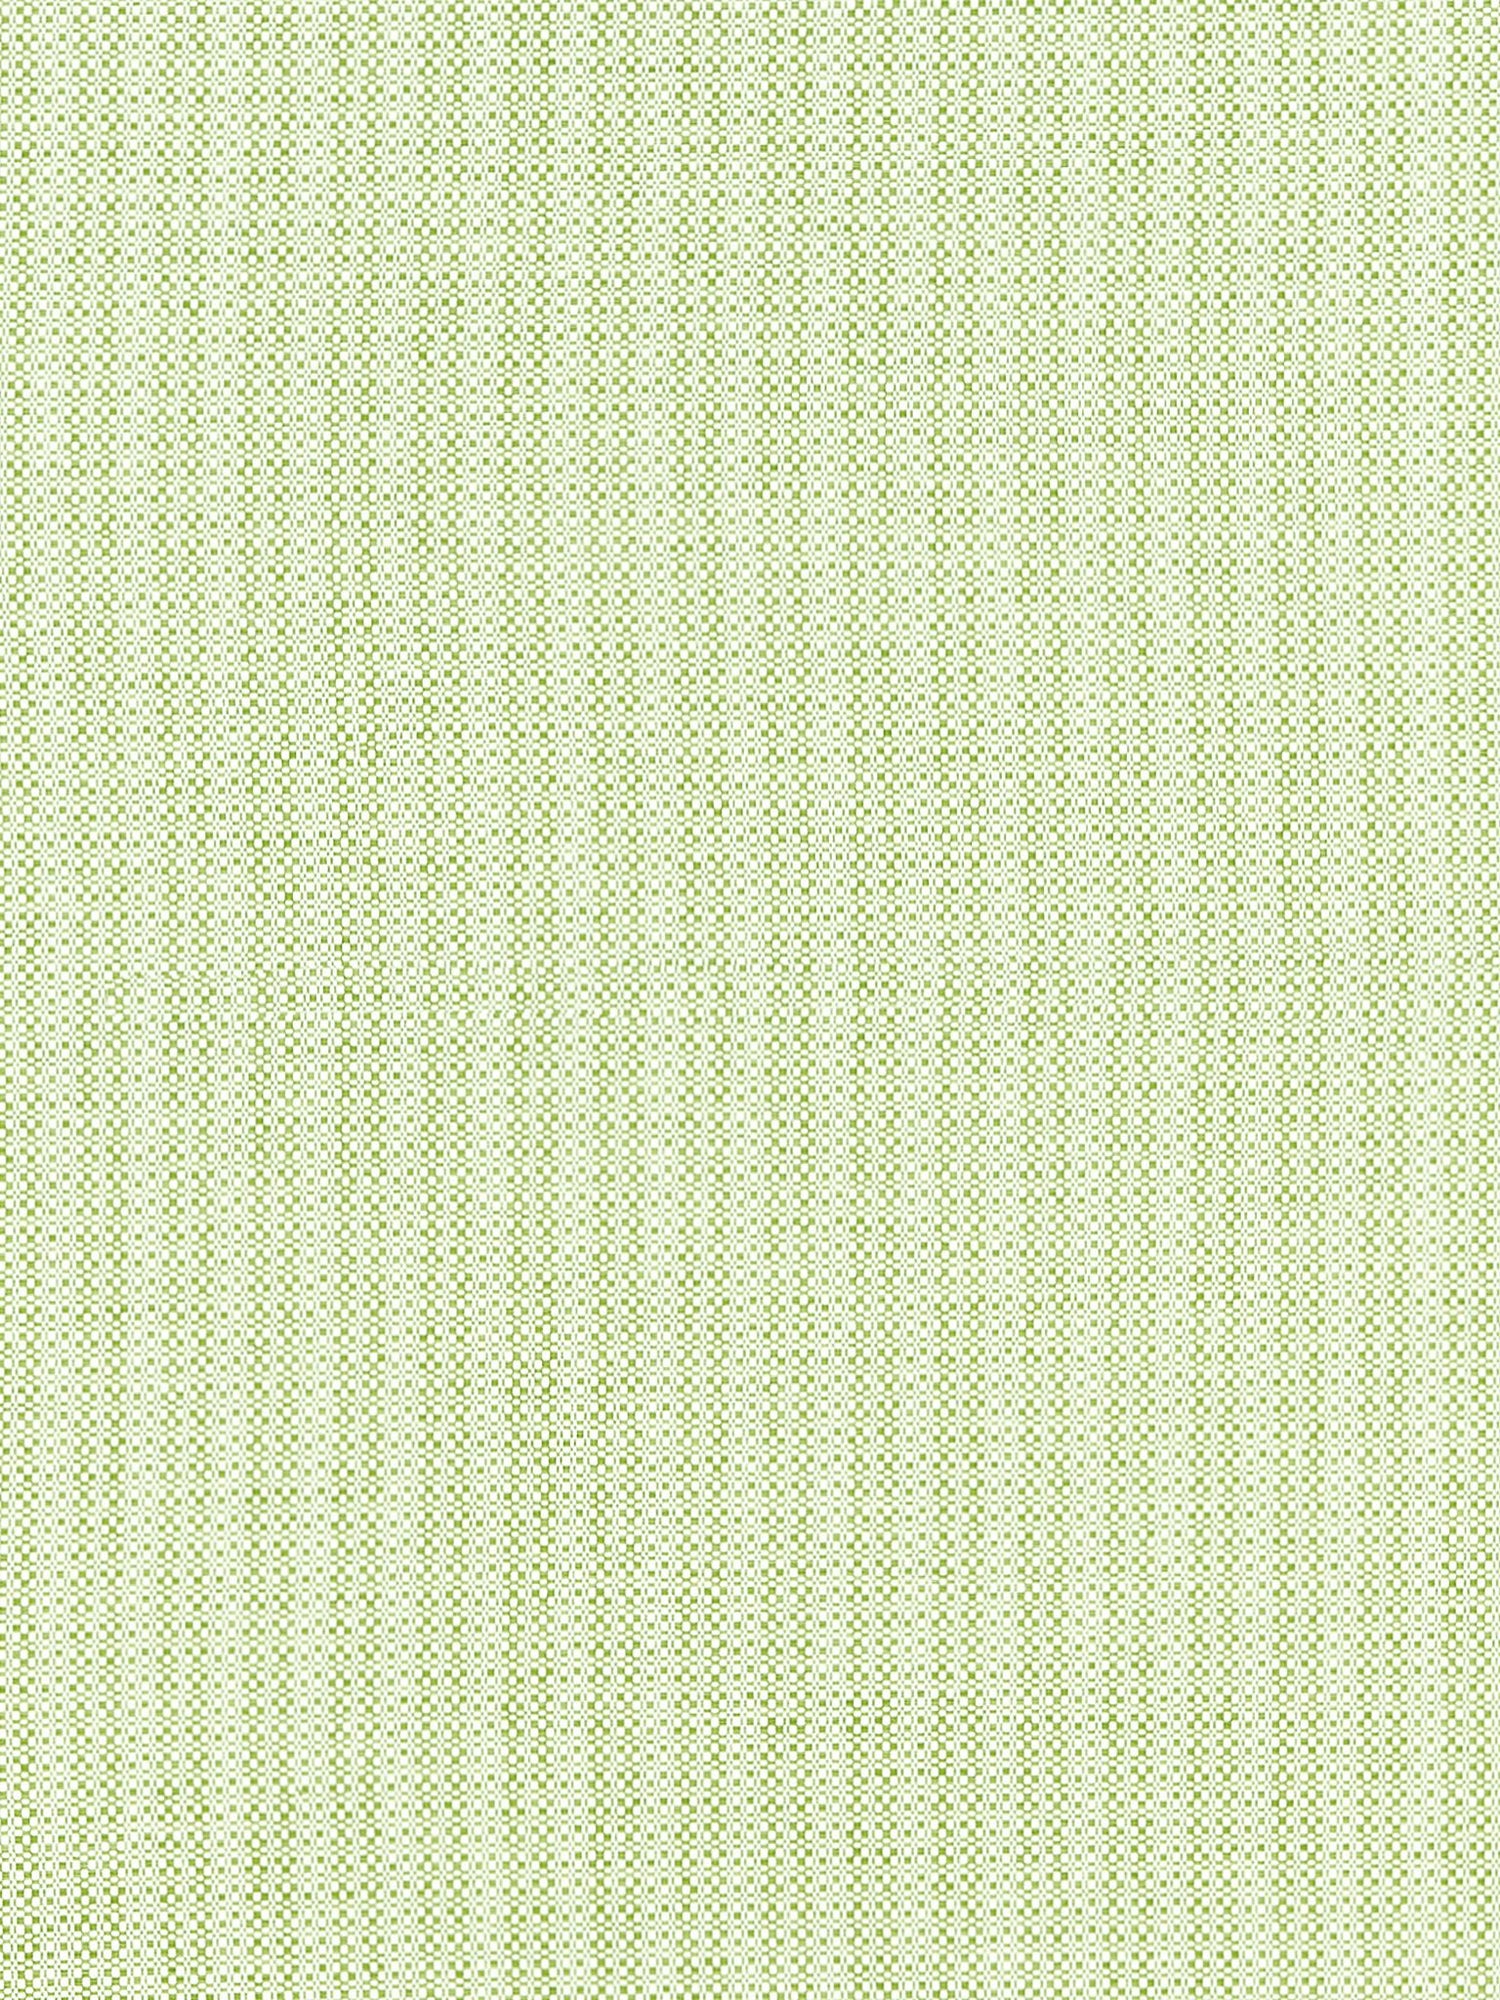 Tahiti Tweed fabric in palm color - pattern number SC 000227192 - by Scalamandre in the Scalamandre Fabrics Book 1 collection